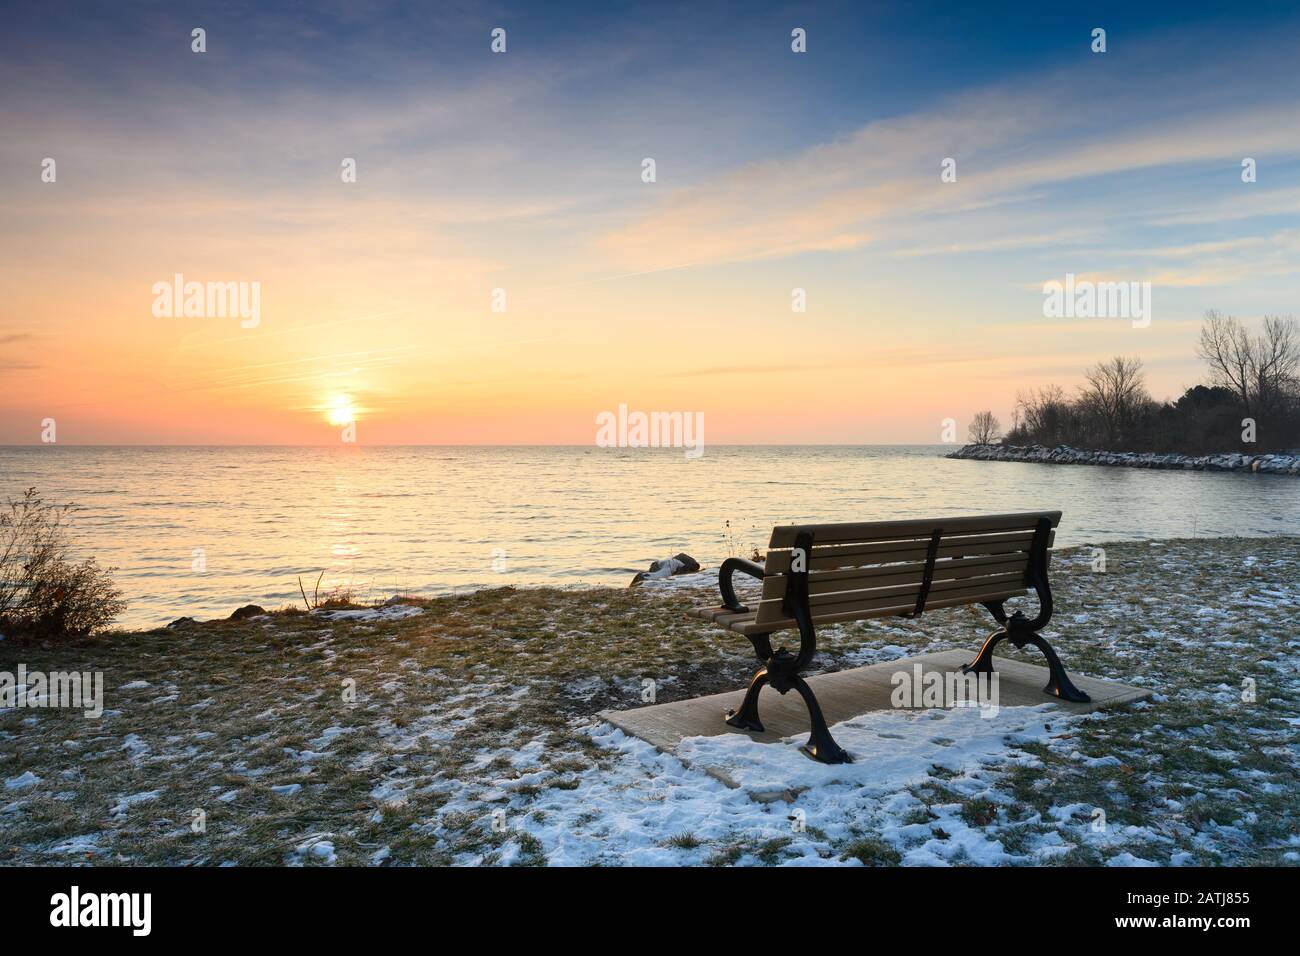 The sun brings light back into the world following the long, dark winter solstice, as seen from Toronto, Ontario's popular Ashbridges Bay Park along t Stock Photo